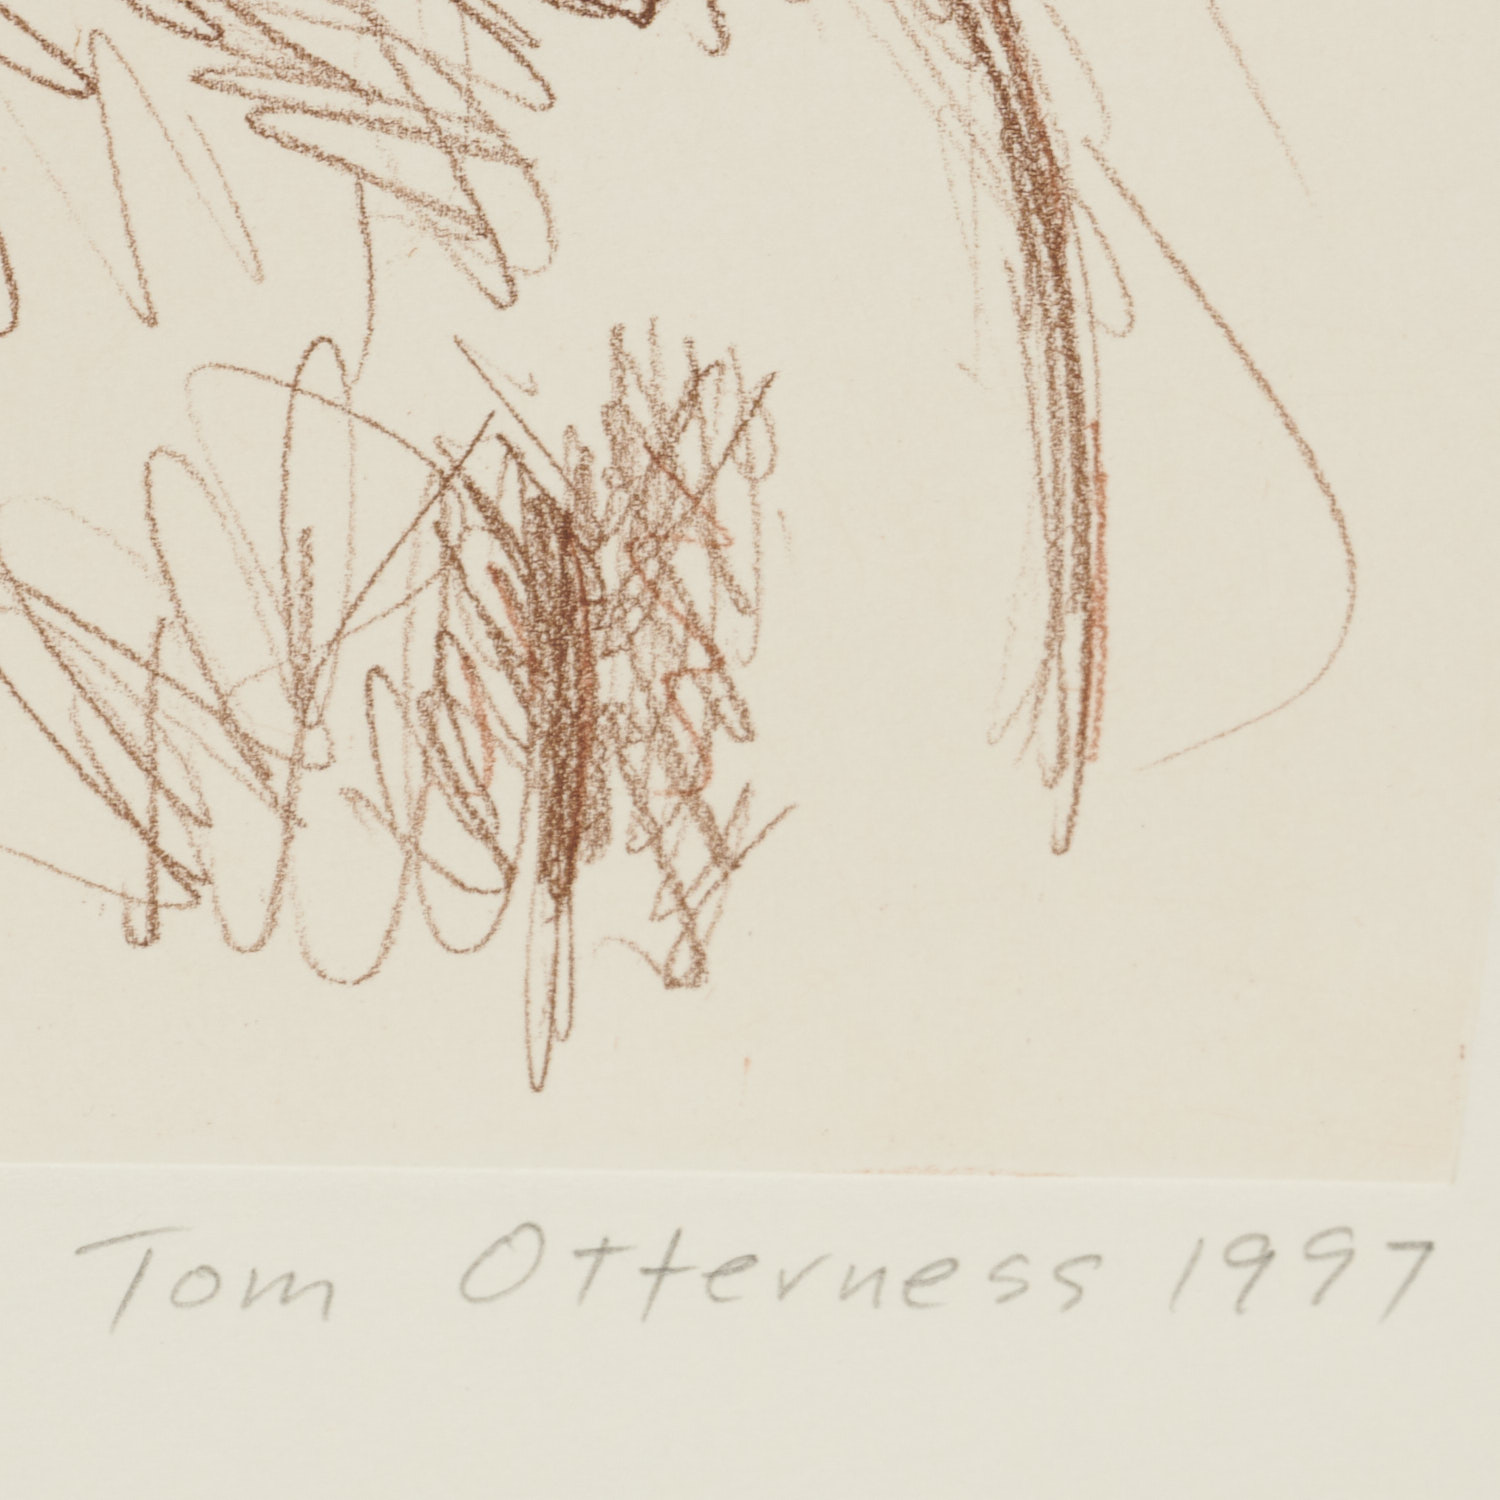 Tom Otterness, etching on paper, 1997 - Image 3 of 6